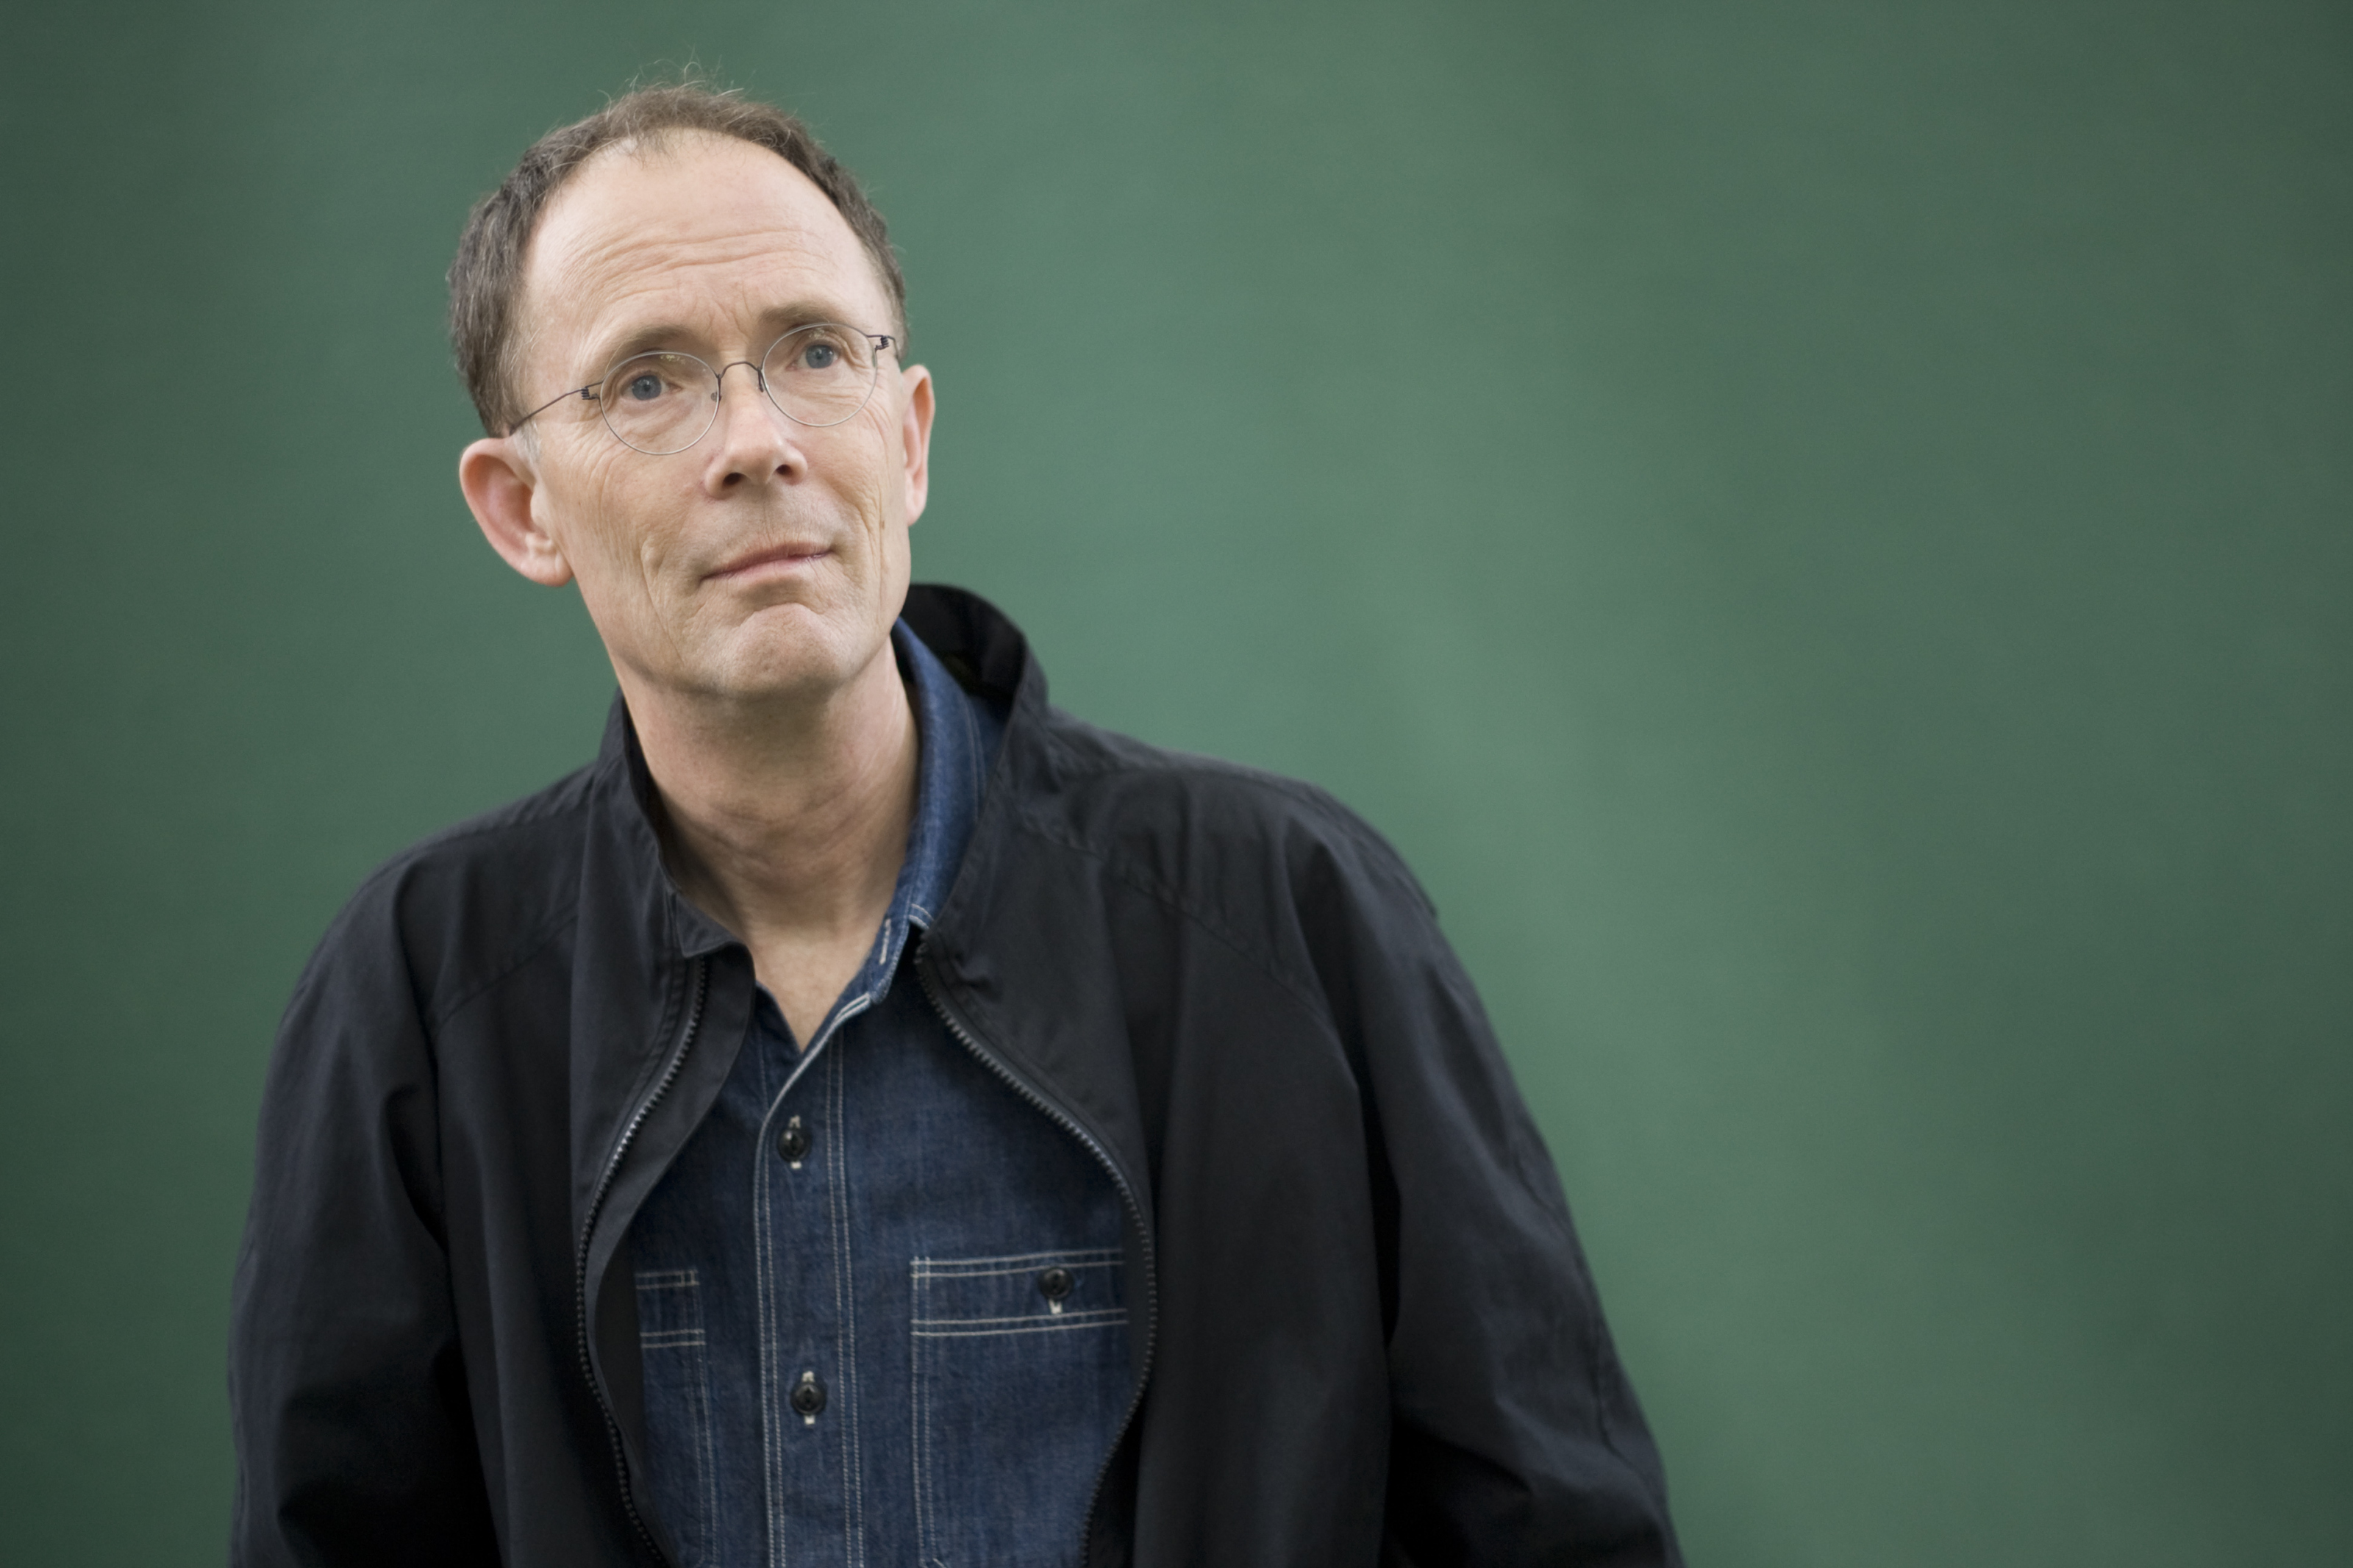 s 'Peripheral' brings William Gibson's sci-fi tale up to date